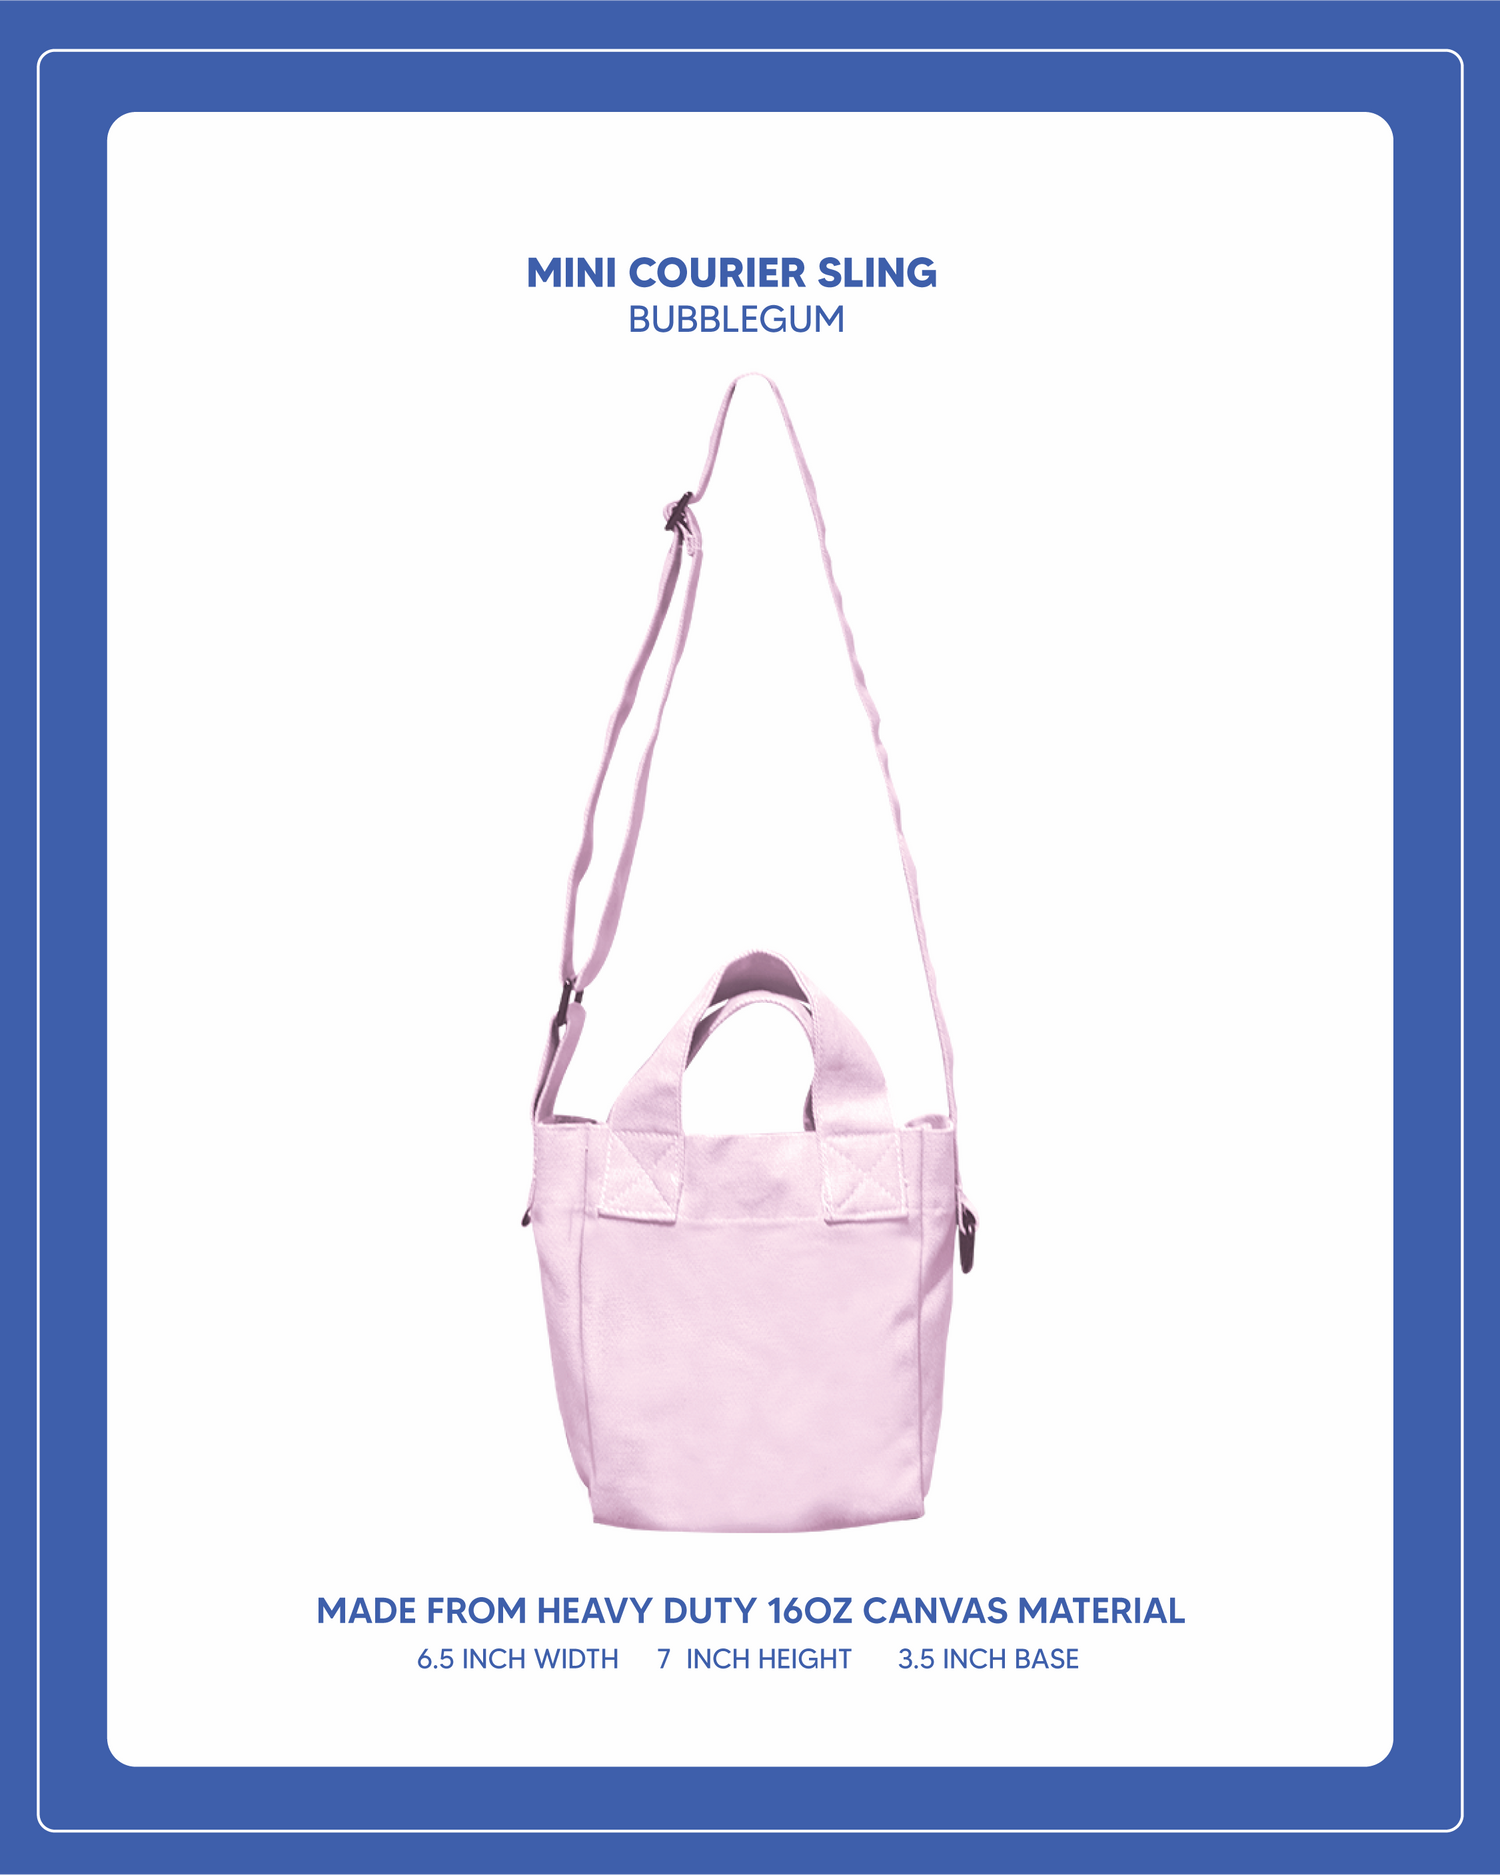 Mini Courier Sling